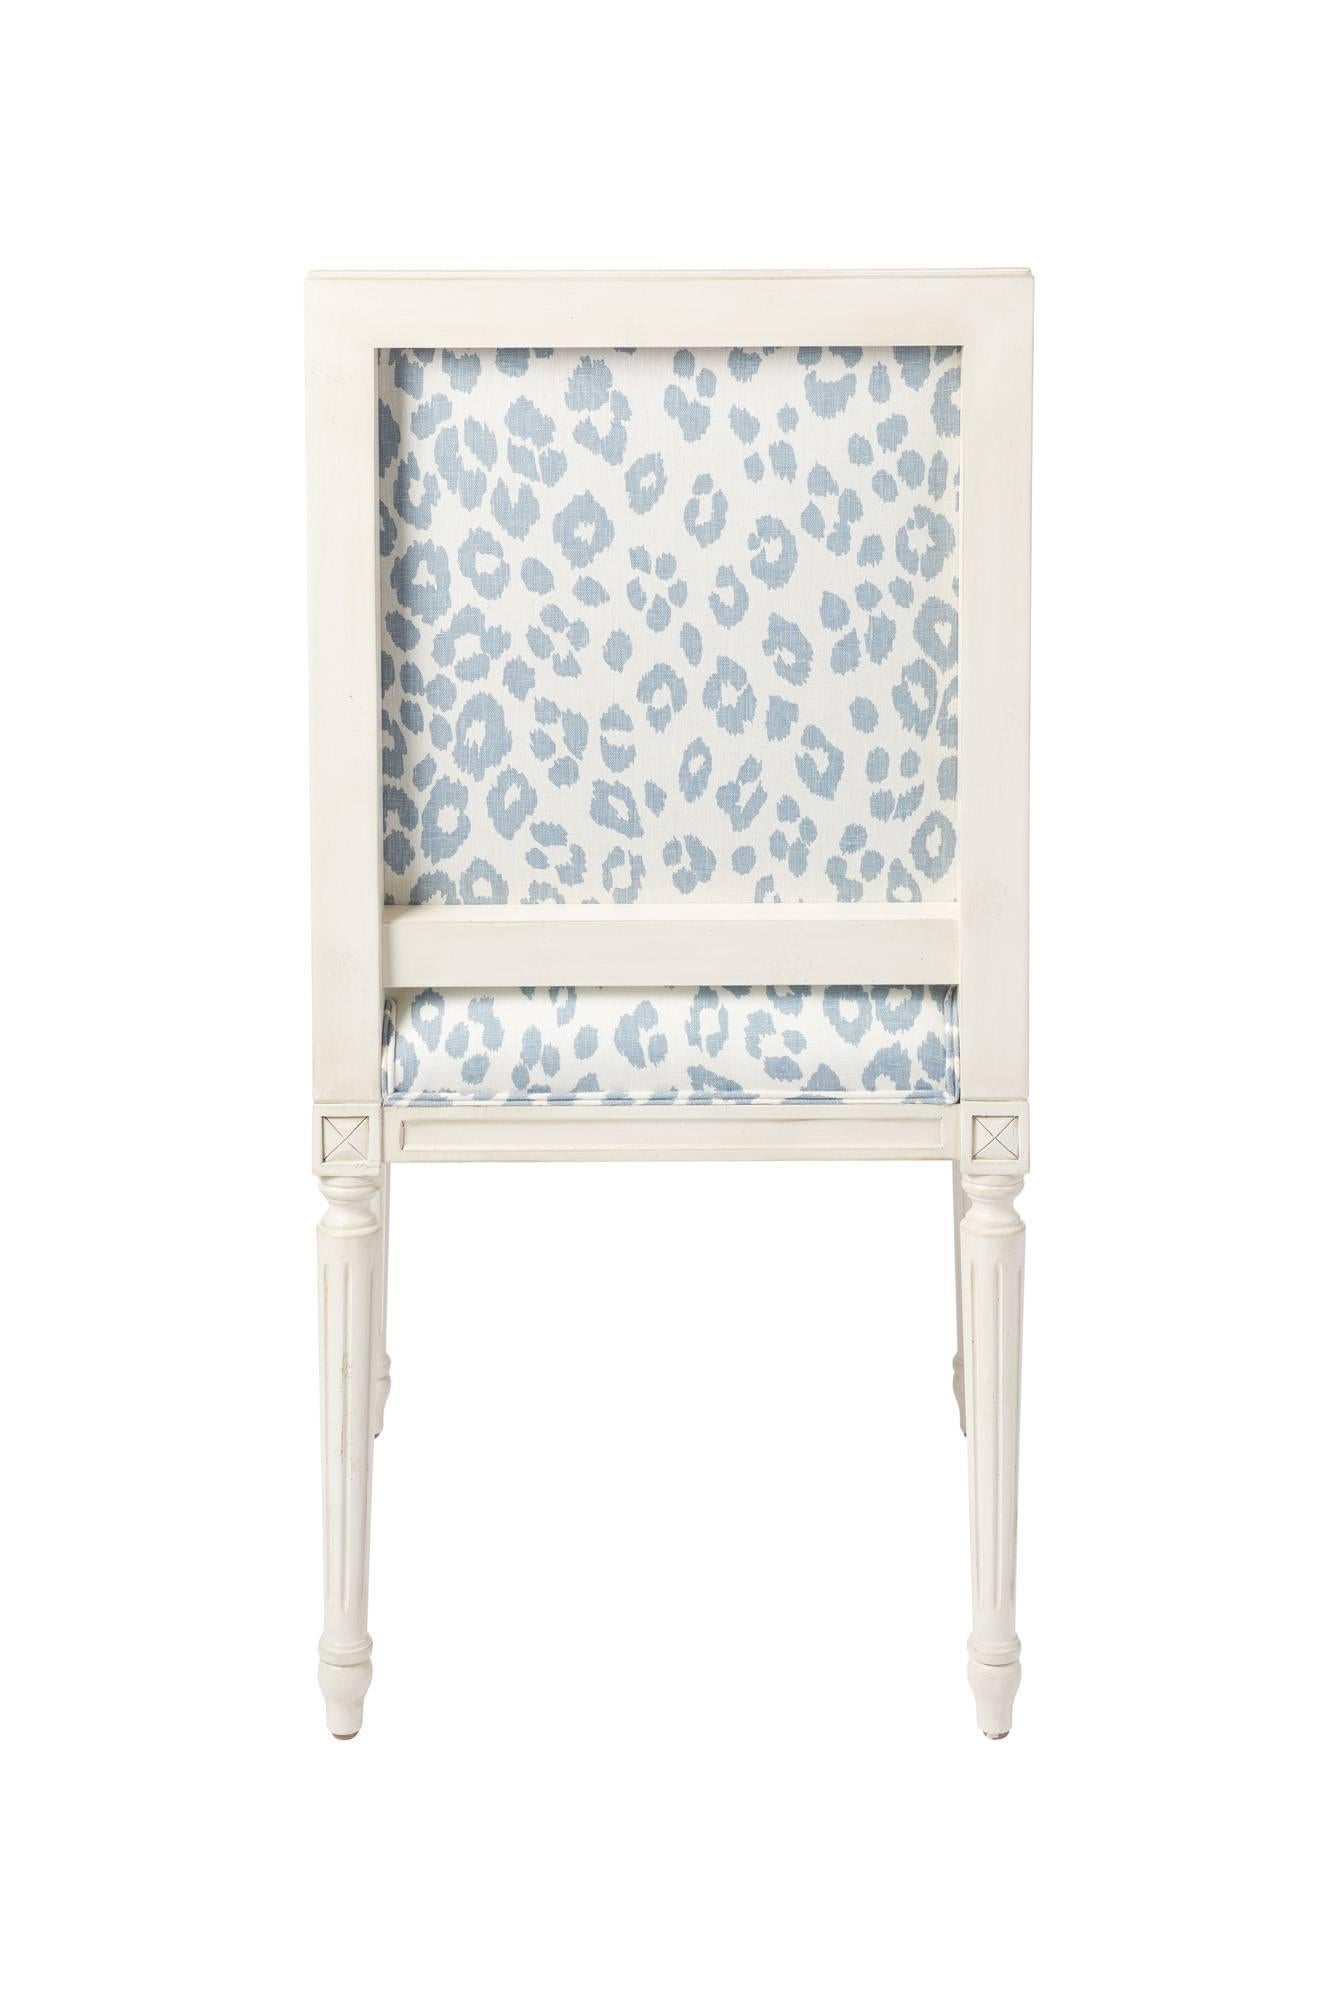 Schumacher Marie Therese Iconic Leopard Blue Hand-Carved Beechwood Side Chair  4